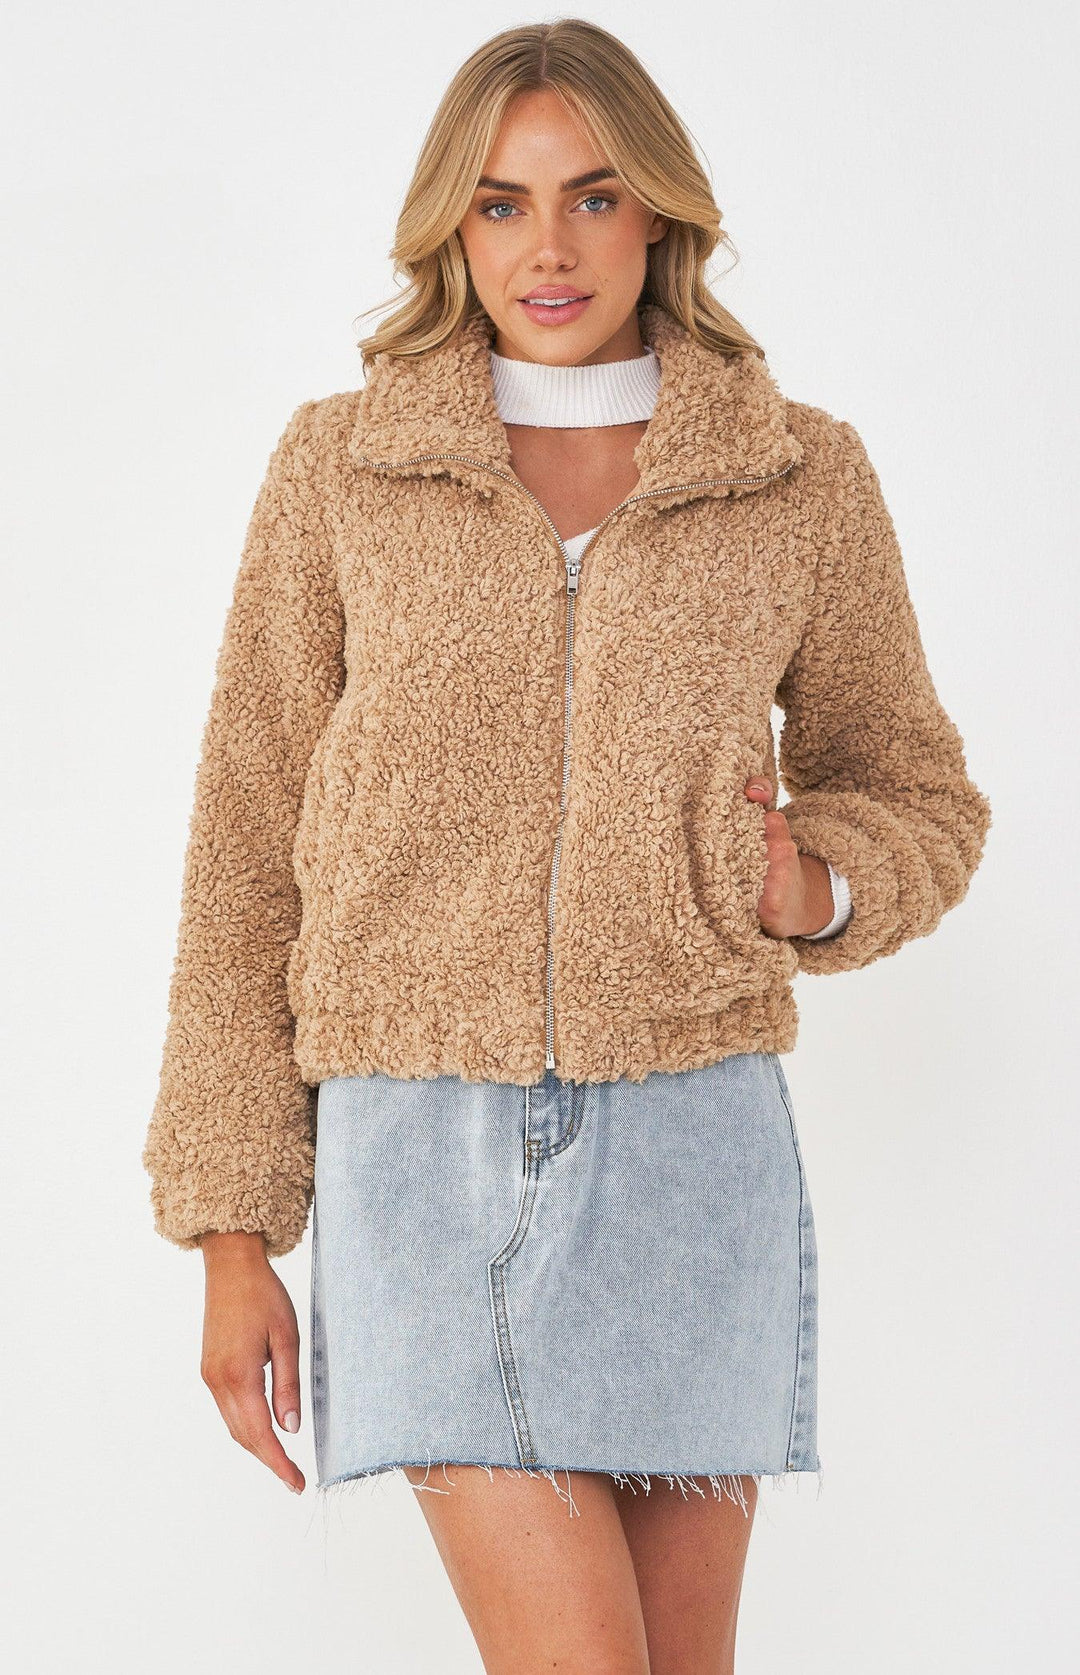 Here For You Teddy Jacket - Camel Outerwear